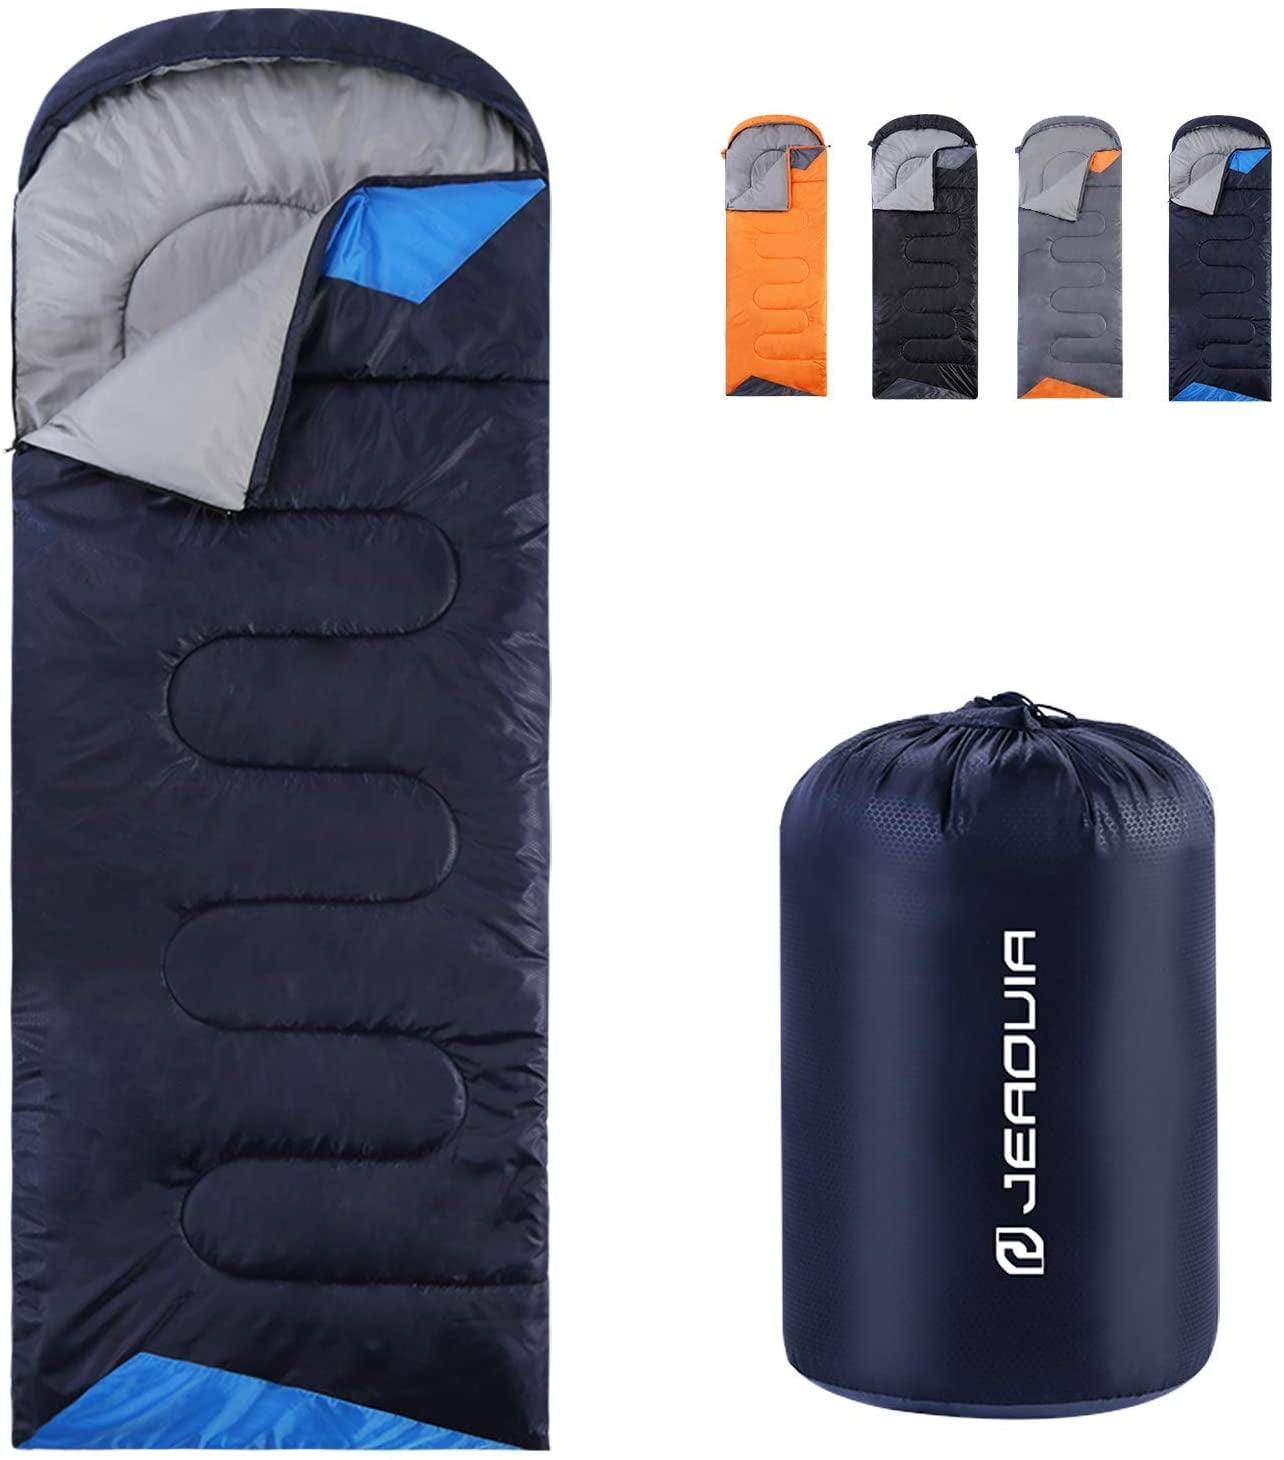 Outdoor Compression Sleeping Bag Camping Lightweight Waterproof Stuff Sack Pouch 